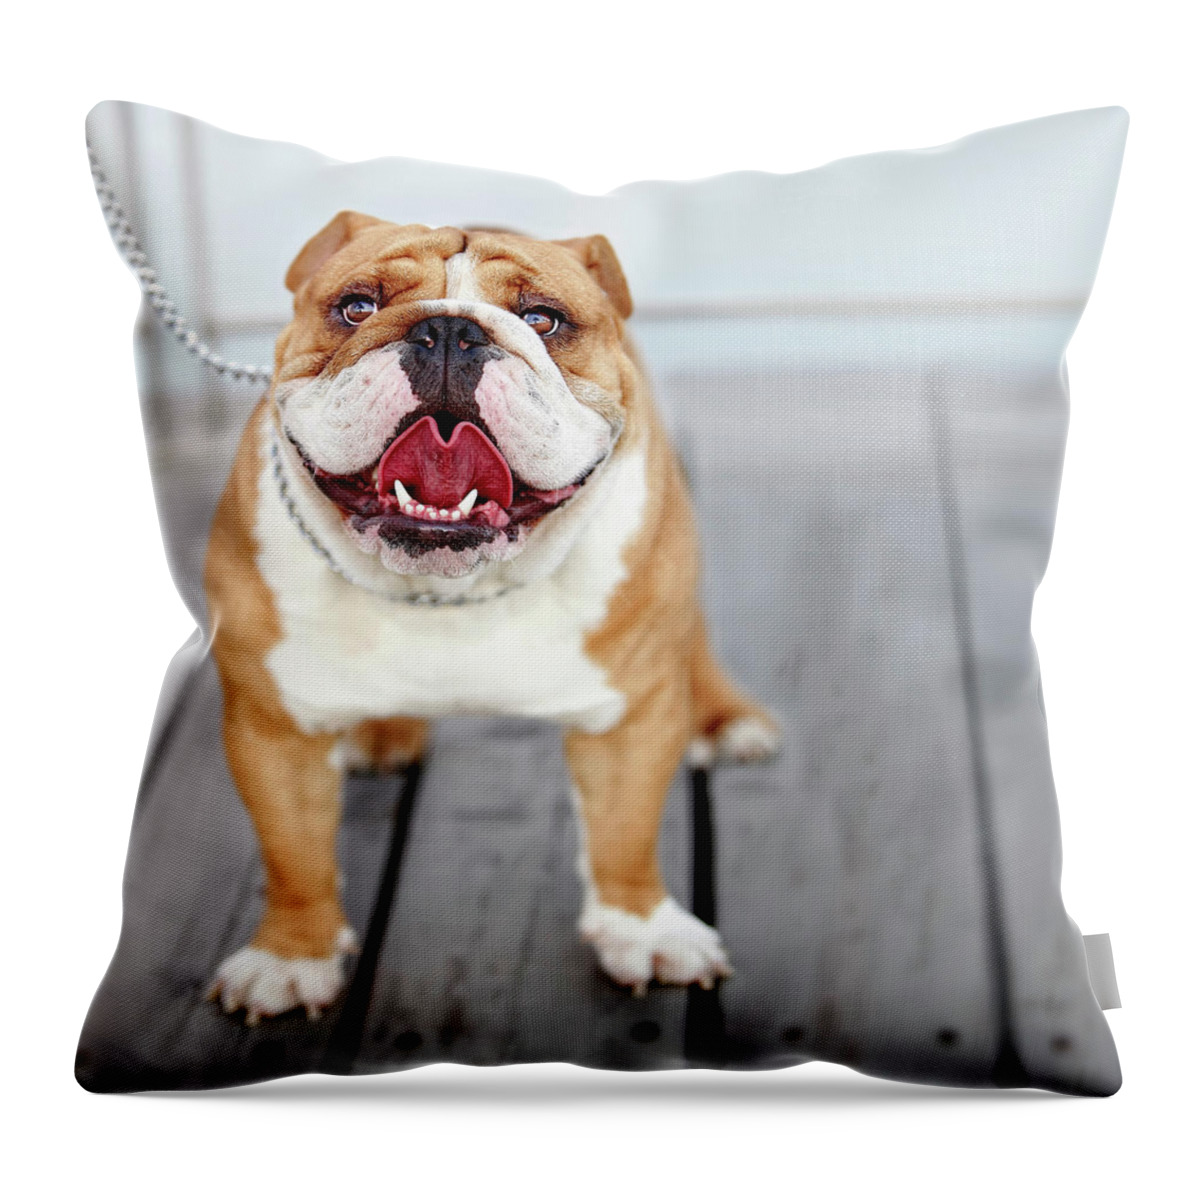 #faatoppicks Throw Pillow featuring the photograph Puppy Dog Breed English Bulldog by Maika 777